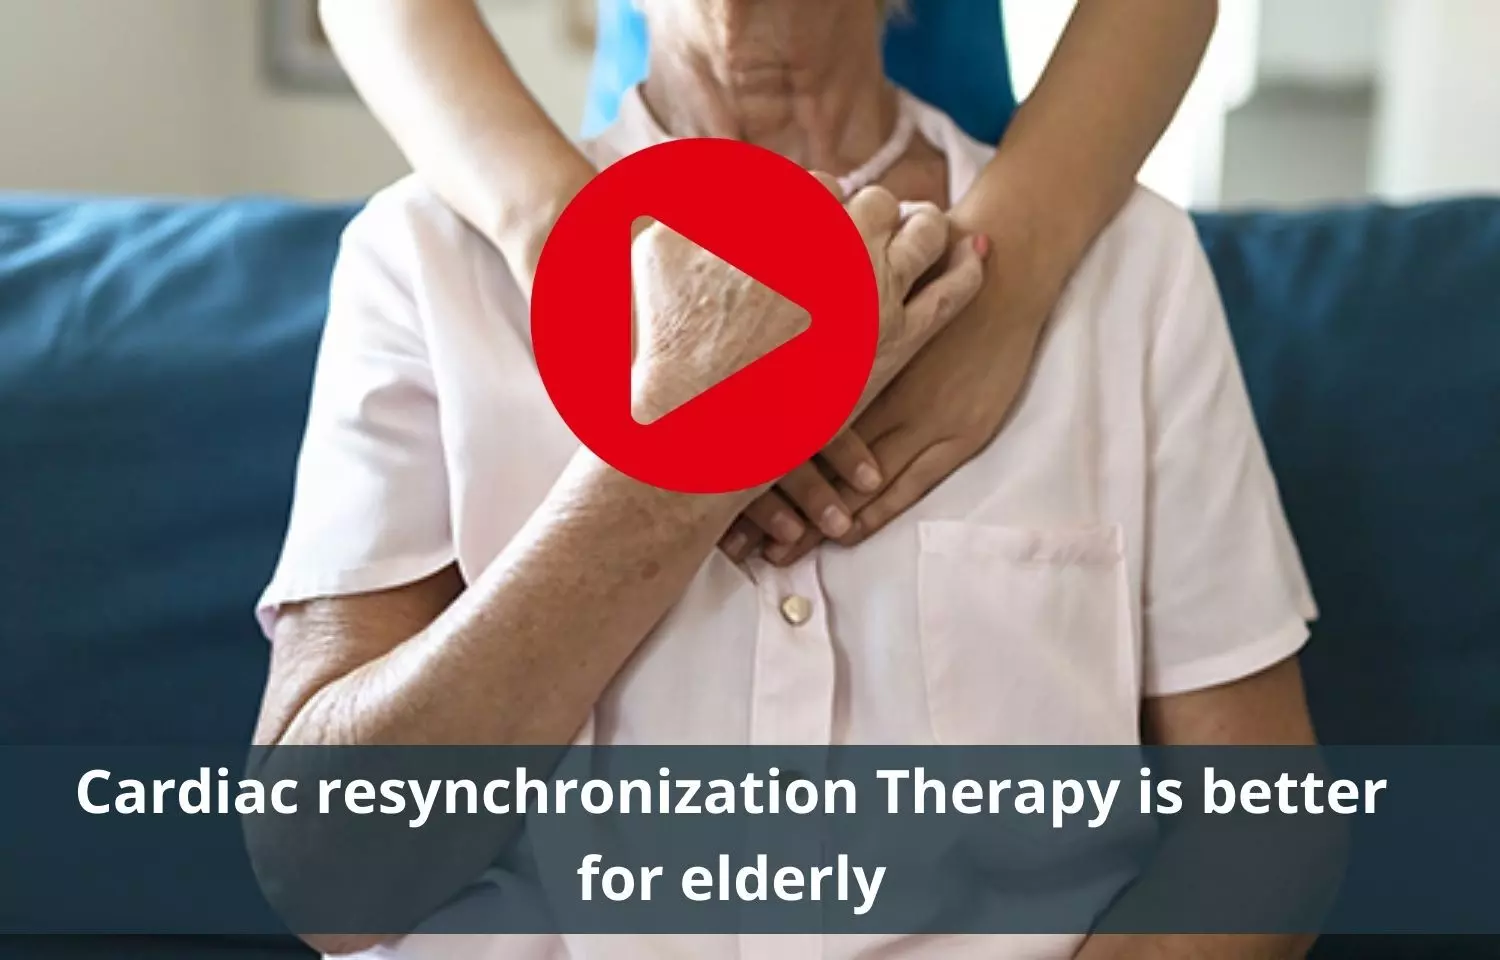 Cardiac resynchronization Therapy is effective in elderly people with cardiac disease